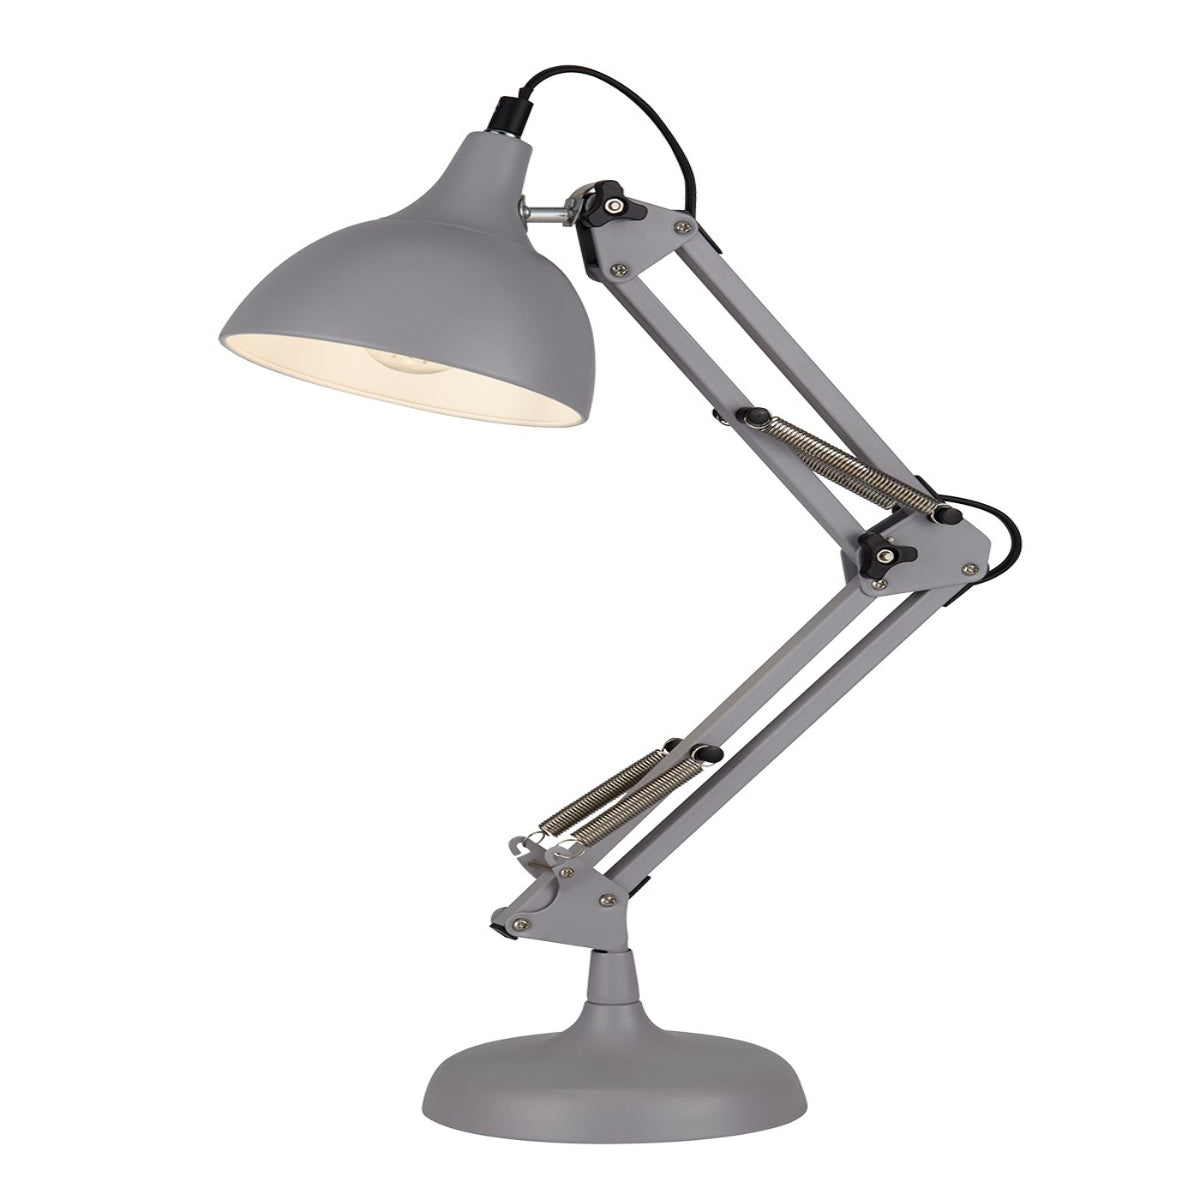 Our Ezra desk lamp is the perfect was to brighten your workspace or to simply add a stylish light solution to your room. It is modern take on the classic task lamp and comes in a soft grey finish. Adjustable to your desired position